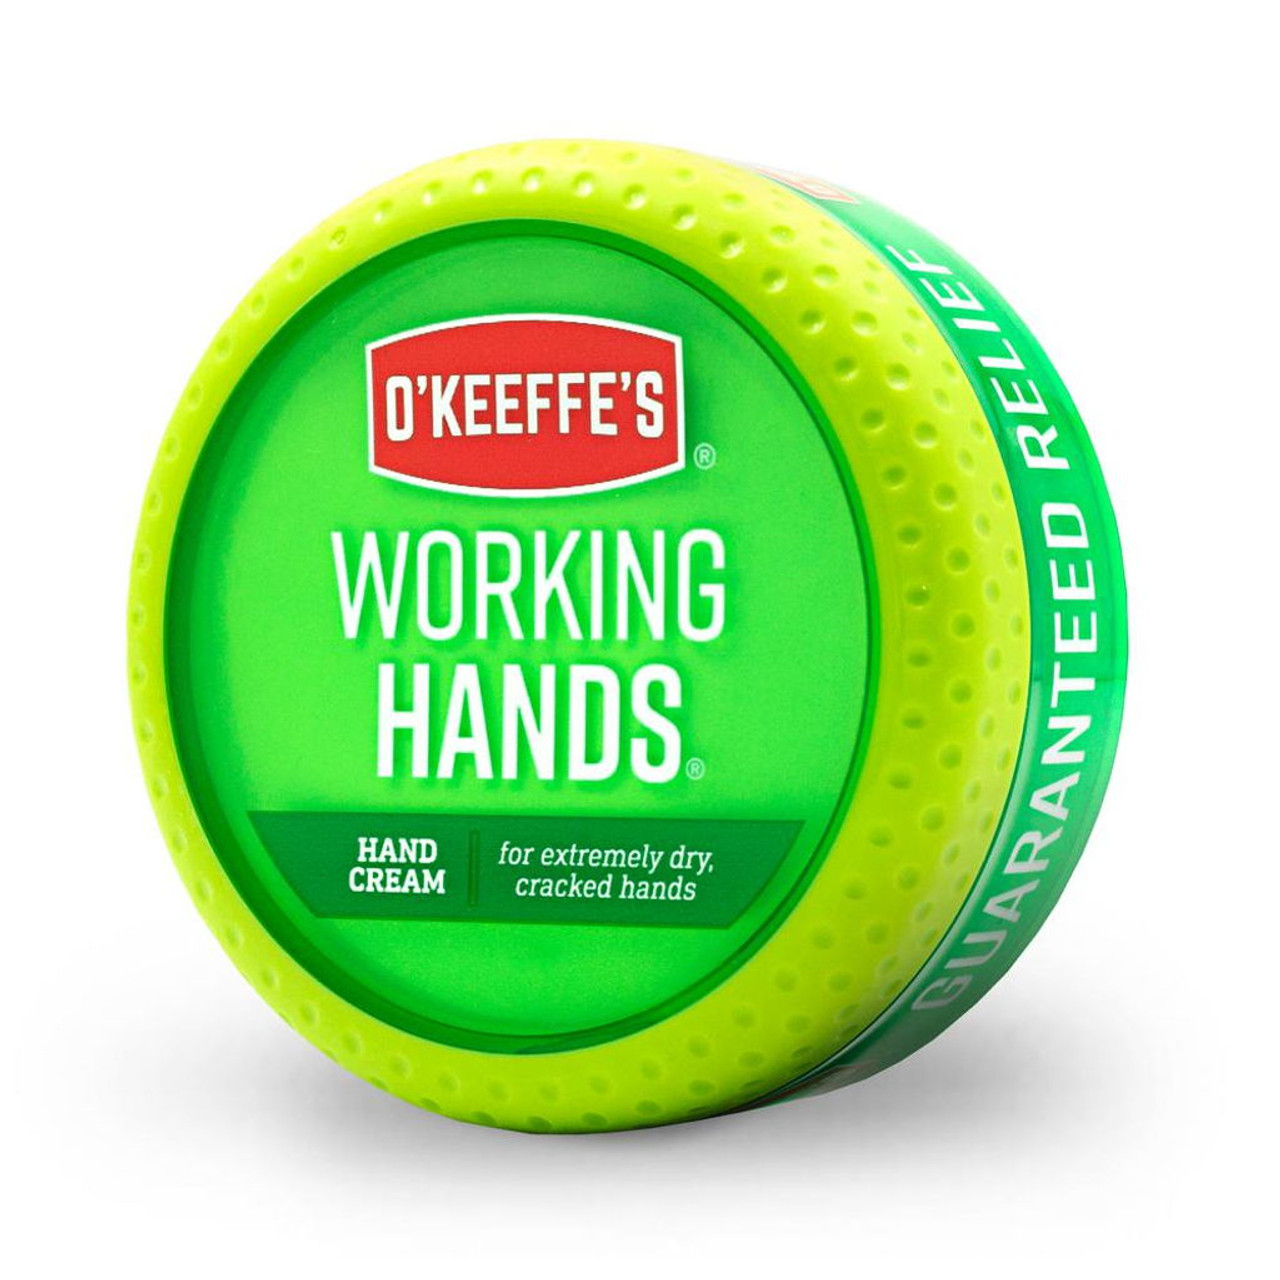 O?Keeffe?s Working Hands Tube, 3 oz